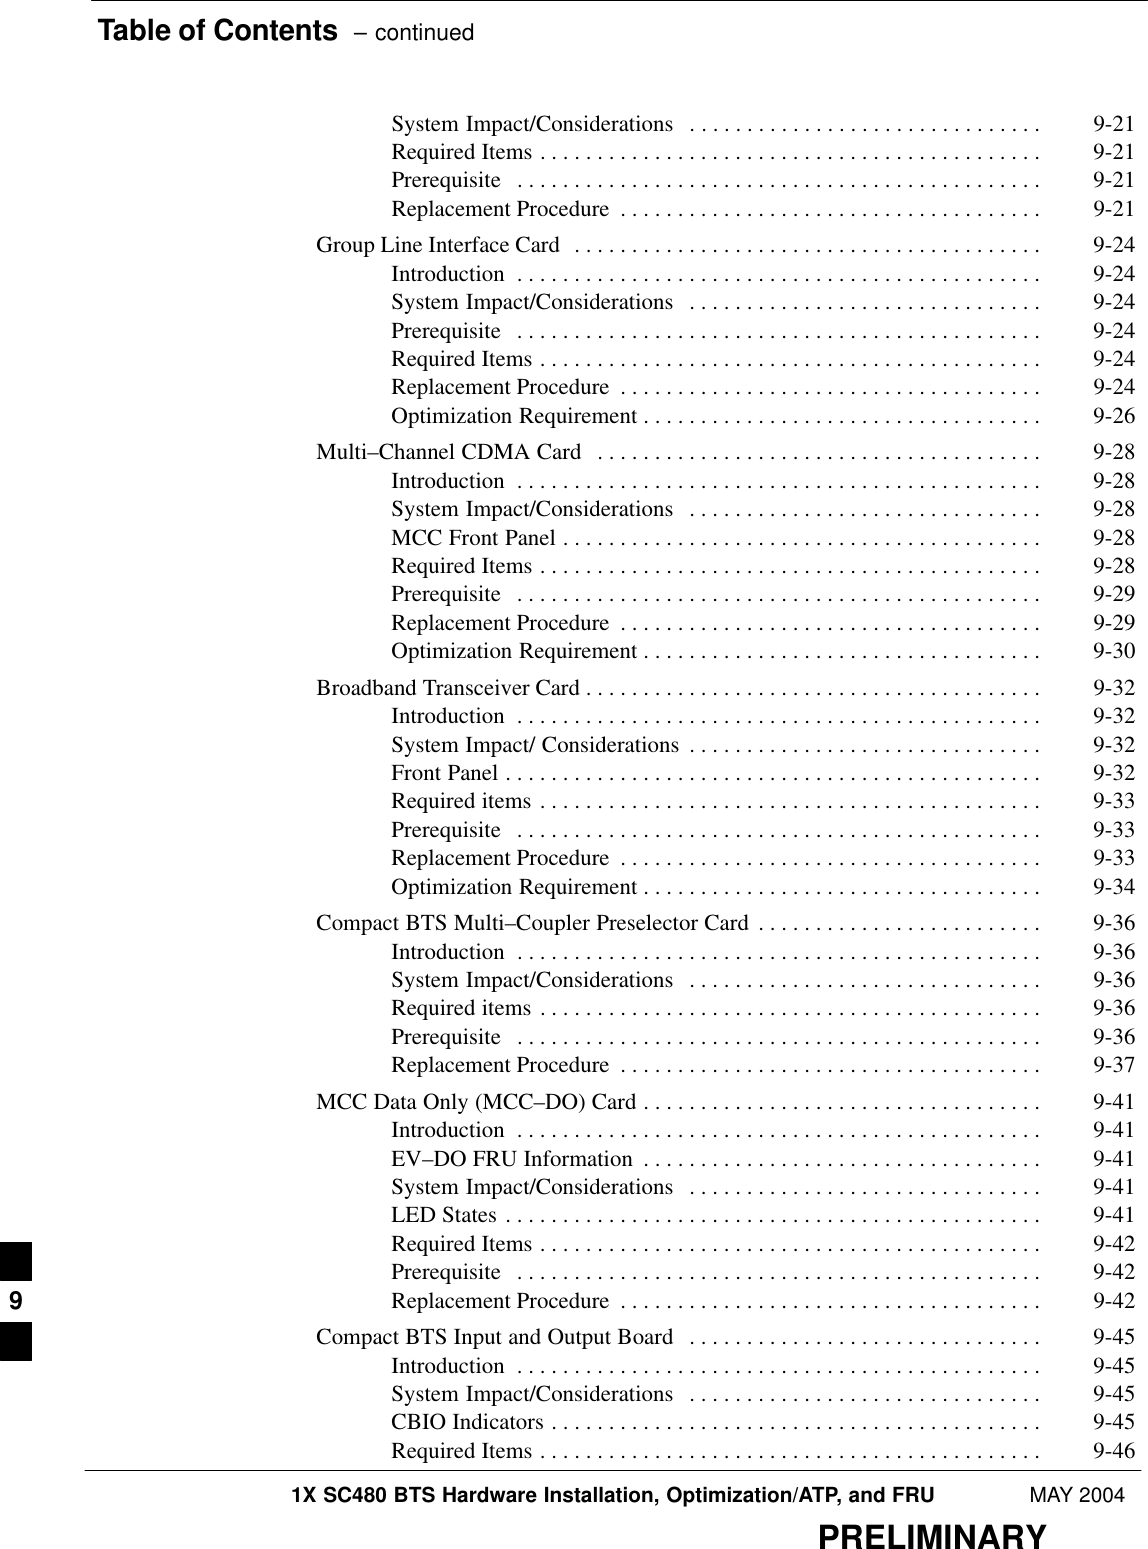 Table of Contents  – continued1X SC480 BTS Hardware Installation, Optimization/ATP, and FRU MAY 2004PRELIMINARYSystem Impact/Considerations 9-21 . . . . . . . . . . . . . . . . . . . . . . . . . . . . . . . Required Items 9-21 . . . . . . . . . . . . . . . . . . . . . . . . . . . . . . . . . . . . . . . . . . . . Prerequisite 9-21 . . . . . . . . . . . . . . . . . . . . . . . . . . . . . . . . . . . . . . . . . . . . . . Replacement Procedure 9-21 . . . . . . . . . . . . . . . . . . . . . . . . . . . . . . . . . . . . . Group Line Interface Card 9-24 . . . . . . . . . . . . . . . . . . . . . . . . . . . . . . . . . . . . . . . . . Introduction 9-24 . . . . . . . . . . . . . . . . . . . . . . . . . . . . . . . . . . . . . . . . . . . . . . System Impact/Considerations 9-24 . . . . . . . . . . . . . . . . . . . . . . . . . . . . . . . Prerequisite 9-24 . . . . . . . . . . . . . . . . . . . . . . . . . . . . . . . . . . . . . . . . . . . . . . Required Items 9-24 . . . . . . . . . . . . . . . . . . . . . . . . . . . . . . . . . . . . . . . . . . . . Replacement Procedure 9-24 . . . . . . . . . . . . . . . . . . . . . . . . . . . . . . . . . . . . . Optimization Requirement 9-26 . . . . . . . . . . . . . . . . . . . . . . . . . . . . . . . . . . . Multi–Channel CDMA Card 9-28 . . . . . . . . . . . . . . . . . . . . . . . . . . . . . . . . . . . . . . . Introduction 9-28 . . . . . . . . . . . . . . . . . . . . . . . . . . . . . . . . . . . . . . . . . . . . . . System Impact/Considerations 9-28 . . . . . . . . . . . . . . . . . . . . . . . . . . . . . . . MCC Front Panel 9-28 . . . . . . . . . . . . . . . . . . . . . . . . . . . . . . . . . . . . . . . . . . Required Items 9-28 . . . . . . . . . . . . . . . . . . . . . . . . . . . . . . . . . . . . . . . . . . . . Prerequisite 9-29 . . . . . . . . . . . . . . . . . . . . . . . . . . . . . . . . . . . . . . . . . . . . . . Replacement Procedure 9-29 . . . . . . . . . . . . . . . . . . . . . . . . . . . . . . . . . . . . . Optimization Requirement 9-30 . . . . . . . . . . . . . . . . . . . . . . . . . . . . . . . . . . . Broadband Transceiver Card 9-32 . . . . . . . . . . . . . . . . . . . . . . . . . . . . . . . . . . . . . . . . Introduction 9-32 . . . . . . . . . . . . . . . . . . . . . . . . . . . . . . . . . . . . . . . . . . . . . . System Impact/ Considerations 9-32 . . . . . . . . . . . . . . . . . . . . . . . . . . . . . . . Front Panel 9-32 . . . . . . . . . . . . . . . . . . . . . . . . . . . . . . . . . . . . . . . . . . . . . . . Required items 9-33 . . . . . . . . . . . . . . . . . . . . . . . . . . . . . . . . . . . . . . . . . . . . Prerequisite 9-33 . . . . . . . . . . . . . . . . . . . . . . . . . . . . . . . . . . . . . . . . . . . . . . Replacement Procedure 9-33 . . . . . . . . . . . . . . . . . . . . . . . . . . . . . . . . . . . . . Optimization Requirement 9-34 . . . . . . . . . . . . . . . . . . . . . . . . . . . . . . . . . . . Compact BTS Multi–Coupler Preselector Card 9-36 . . . . . . . . . . . . . . . . . . . . . . . . . Introduction 9-36 . . . . . . . . . . . . . . . . . . . . . . . . . . . . . . . . . . . . . . . . . . . . . . System Impact/Considerations 9-36 . . . . . . . . . . . . . . . . . . . . . . . . . . . . . . . Required items 9-36 . . . . . . . . . . . . . . . . . . . . . . . . . . . . . . . . . . . . . . . . . . . . Prerequisite 9-36 . . . . . . . . . . . . . . . . . . . . . . . . . . . . . . . . . . . . . . . . . . . . . . Replacement Procedure 9-37 . . . . . . . . . . . . . . . . . . . . . . . . . . . . . . . . . . . . . MCC Data Only (MCC–DO) Card 9-41 . . . . . . . . . . . . . . . . . . . . . . . . . . . . . . . . . . . Introduction 9-41 . . . . . . . . . . . . . . . . . . . . . . . . . . . . . . . . . . . . . . . . . . . . . . EV–DO FRU Information 9-41 . . . . . . . . . . . . . . . . . . . . . . . . . . . . . . . . . . . System Impact/Considerations 9-41 . . . . . . . . . . . . . . . . . . . . . . . . . . . . . . . LED States 9-41 . . . . . . . . . . . . . . . . . . . . . . . . . . . . . . . . . . . . . . . . . . . . . . . Required Items 9-42 . . . . . . . . . . . . . . . . . . . . . . . . . . . . . . . . . . . . . . . . . . . . Prerequisite 9-42 . . . . . . . . . . . . . . . . . . . . . . . . . . . . . . . . . . . . . . . . . . . . . . Replacement Procedure 9-42 . . . . . . . . . . . . . . . . . . . . . . . . . . . . . . . . . . . . . Compact BTS Input and Output Board 9-45 . . . . . . . . . . . . . . . . . . . . . . . . . . . . . . . Introduction 9-45 . . . . . . . . . . . . . . . . . . . . . . . . . . . . . . . . . . . . . . . . . . . . . . System Impact/Considerations 9-45 . . . . . . . . . . . . . . . . . . . . . . . . . . . . . . . CBIO Indicators 9-45 . . . . . . . . . . . . . . . . . . . . . . . . . . . . . . . . . . . . . . . . . . . Required Items 9-46 . . . . . . . . . . . . . . . . . . . . . . . . . . . . . . . . . . . . . . . . . . . . 9